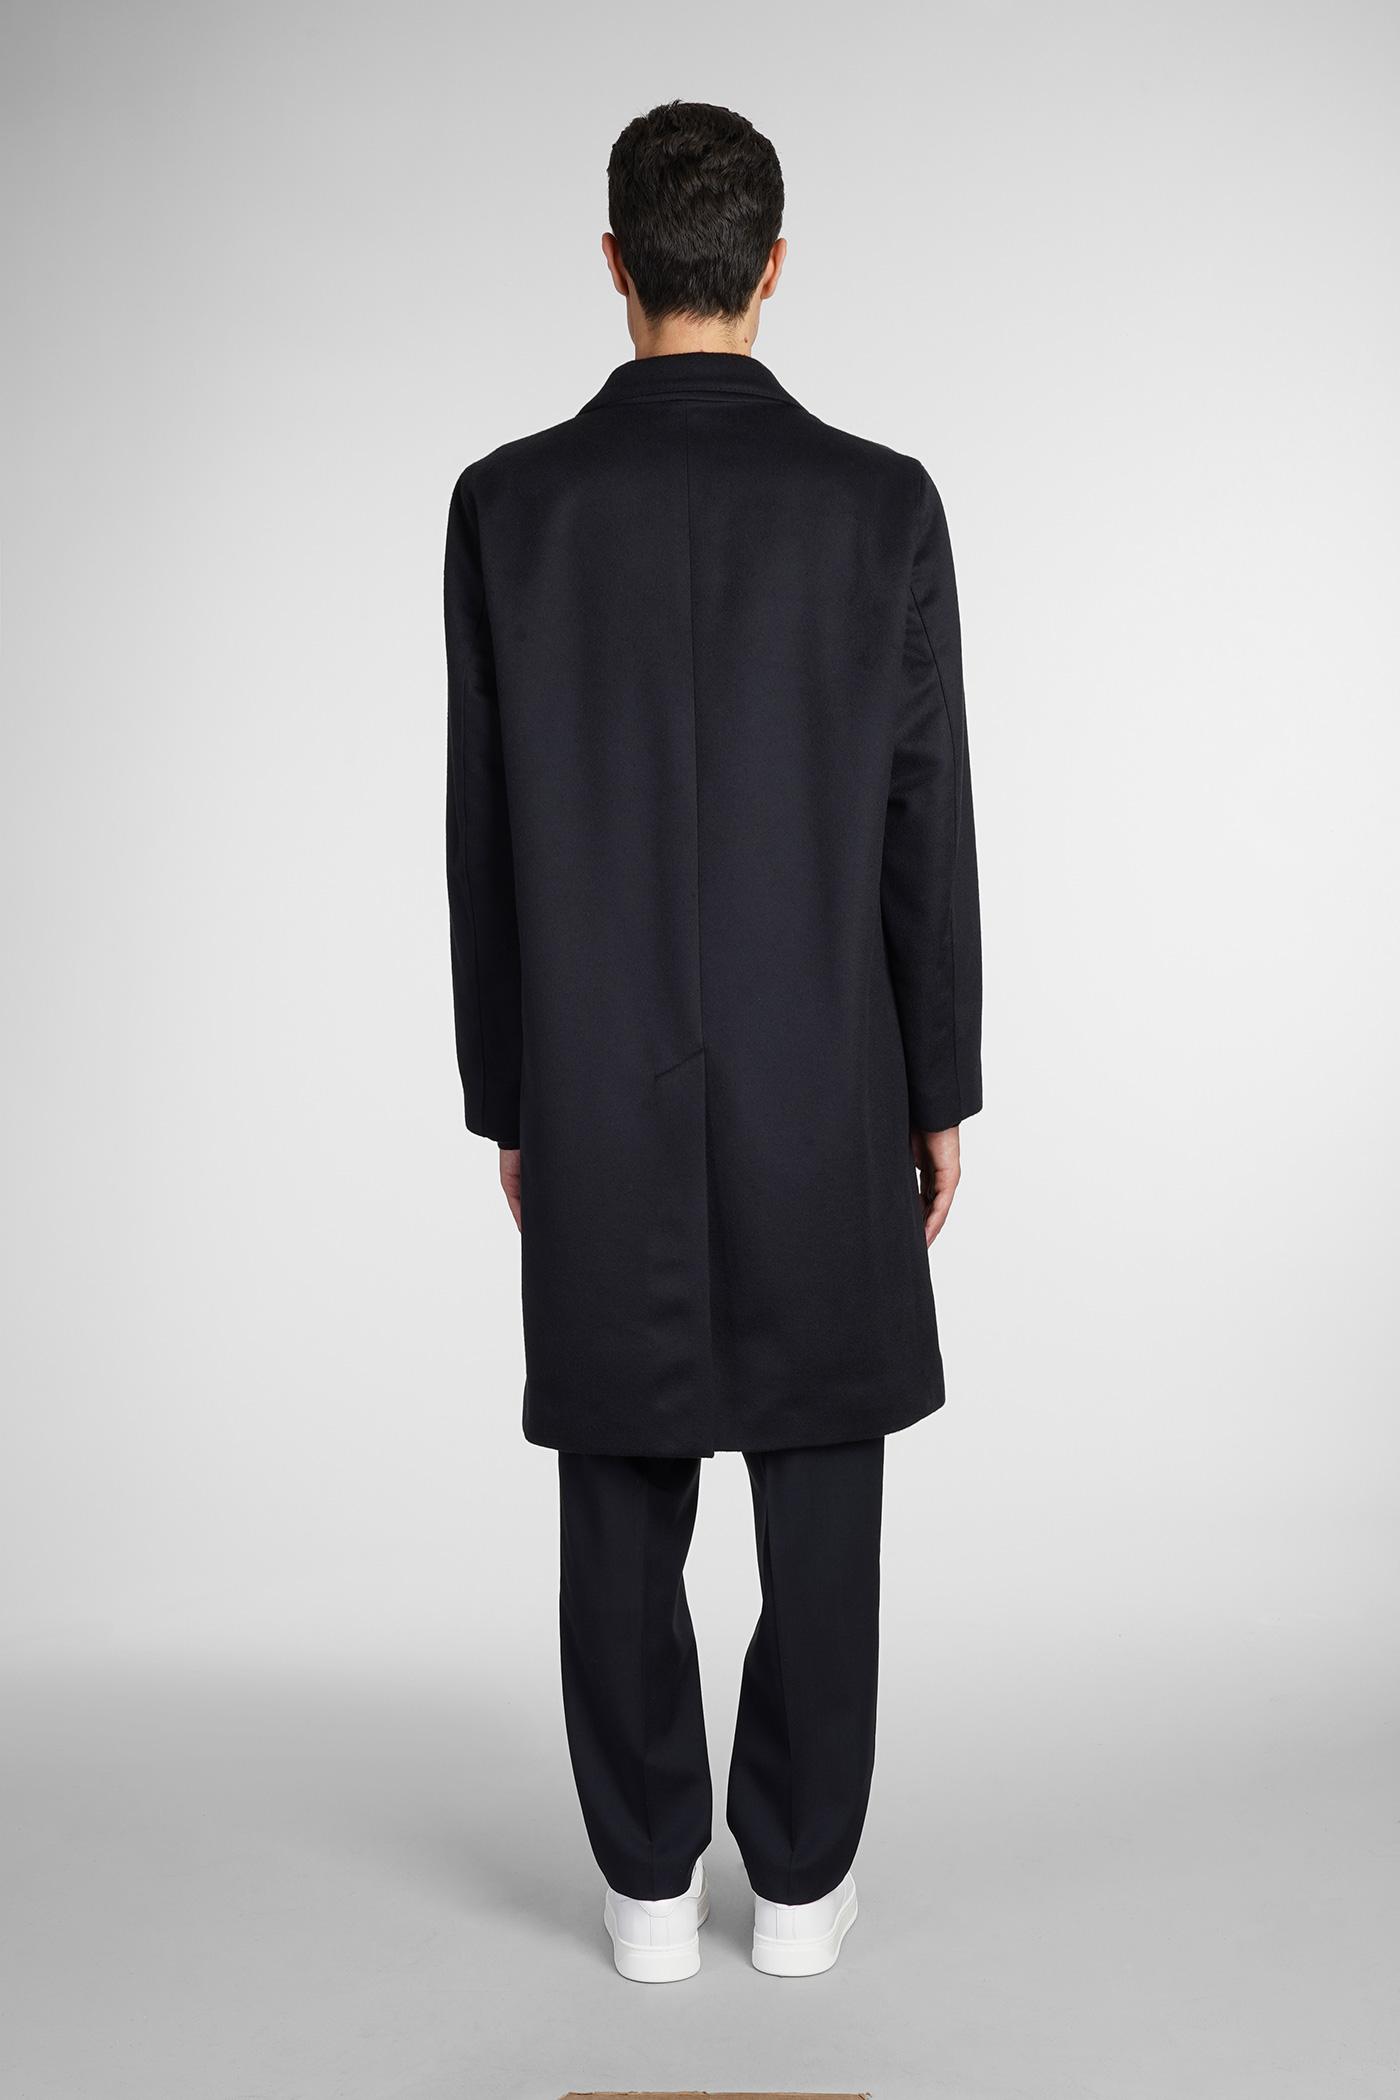 NEW STANLEY Black Wool & Cashmere Coat